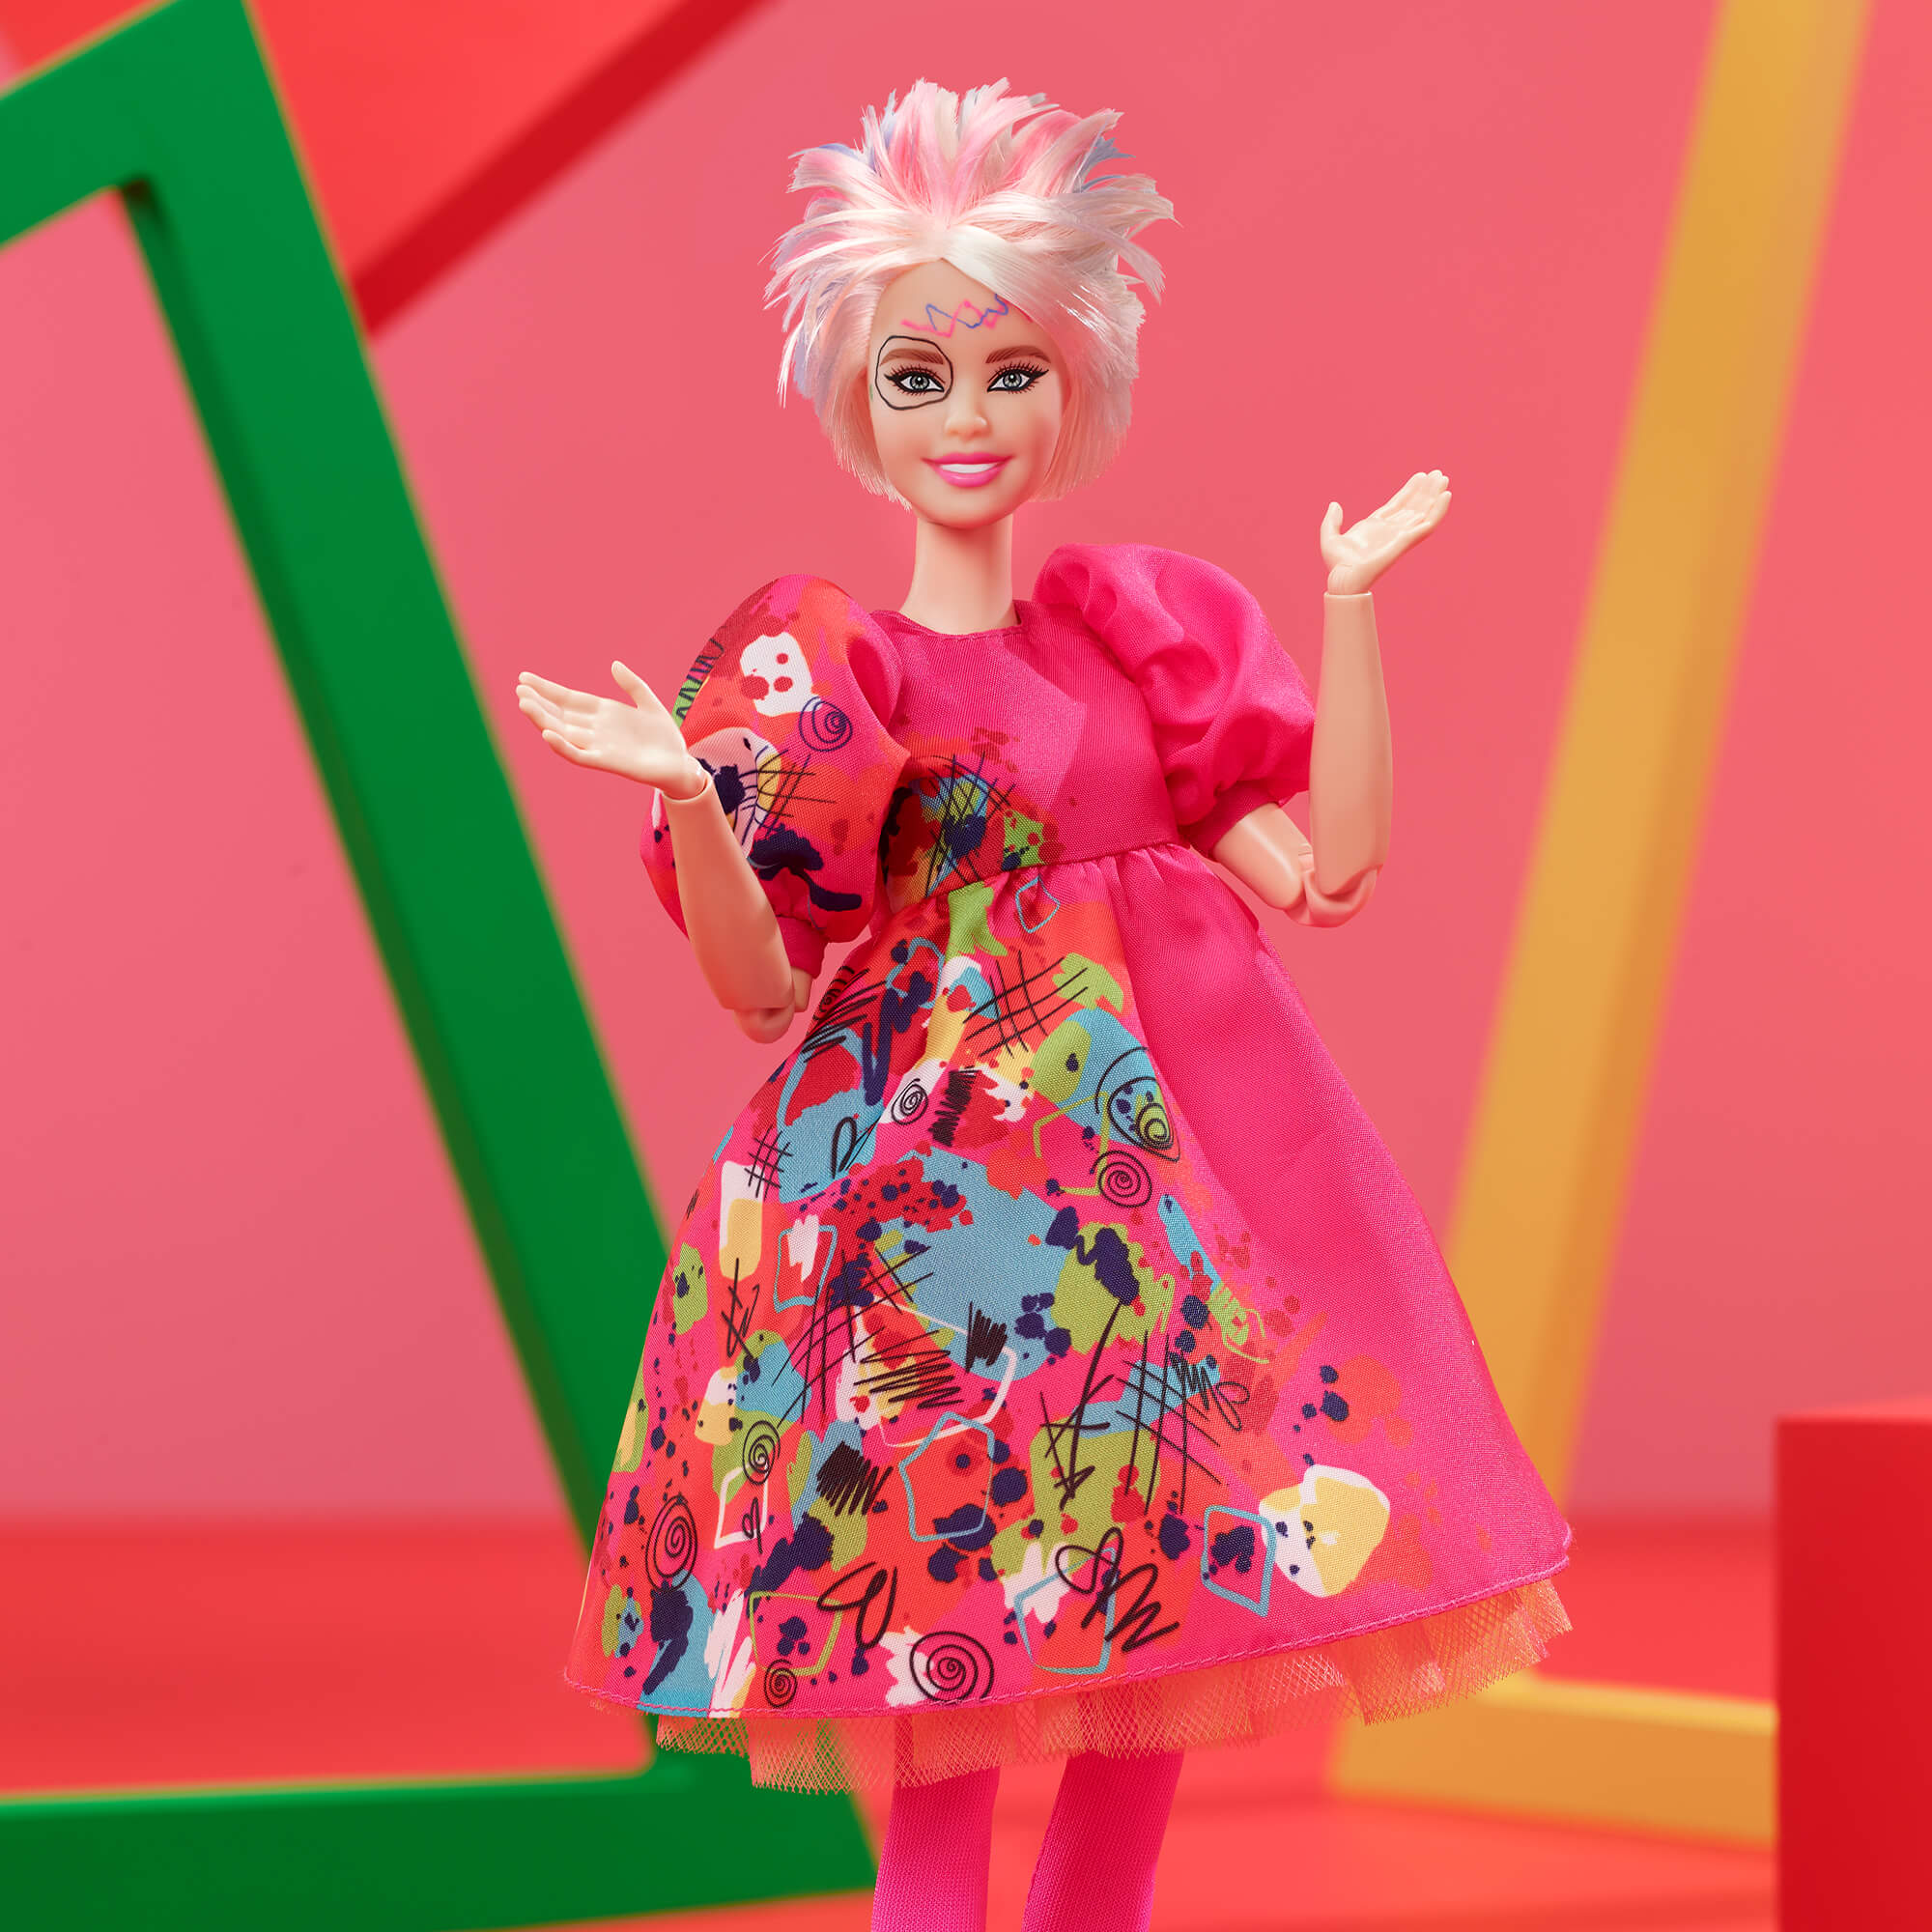 There Has Never Been A More Relatable Barbie Than 'Weird Barbie